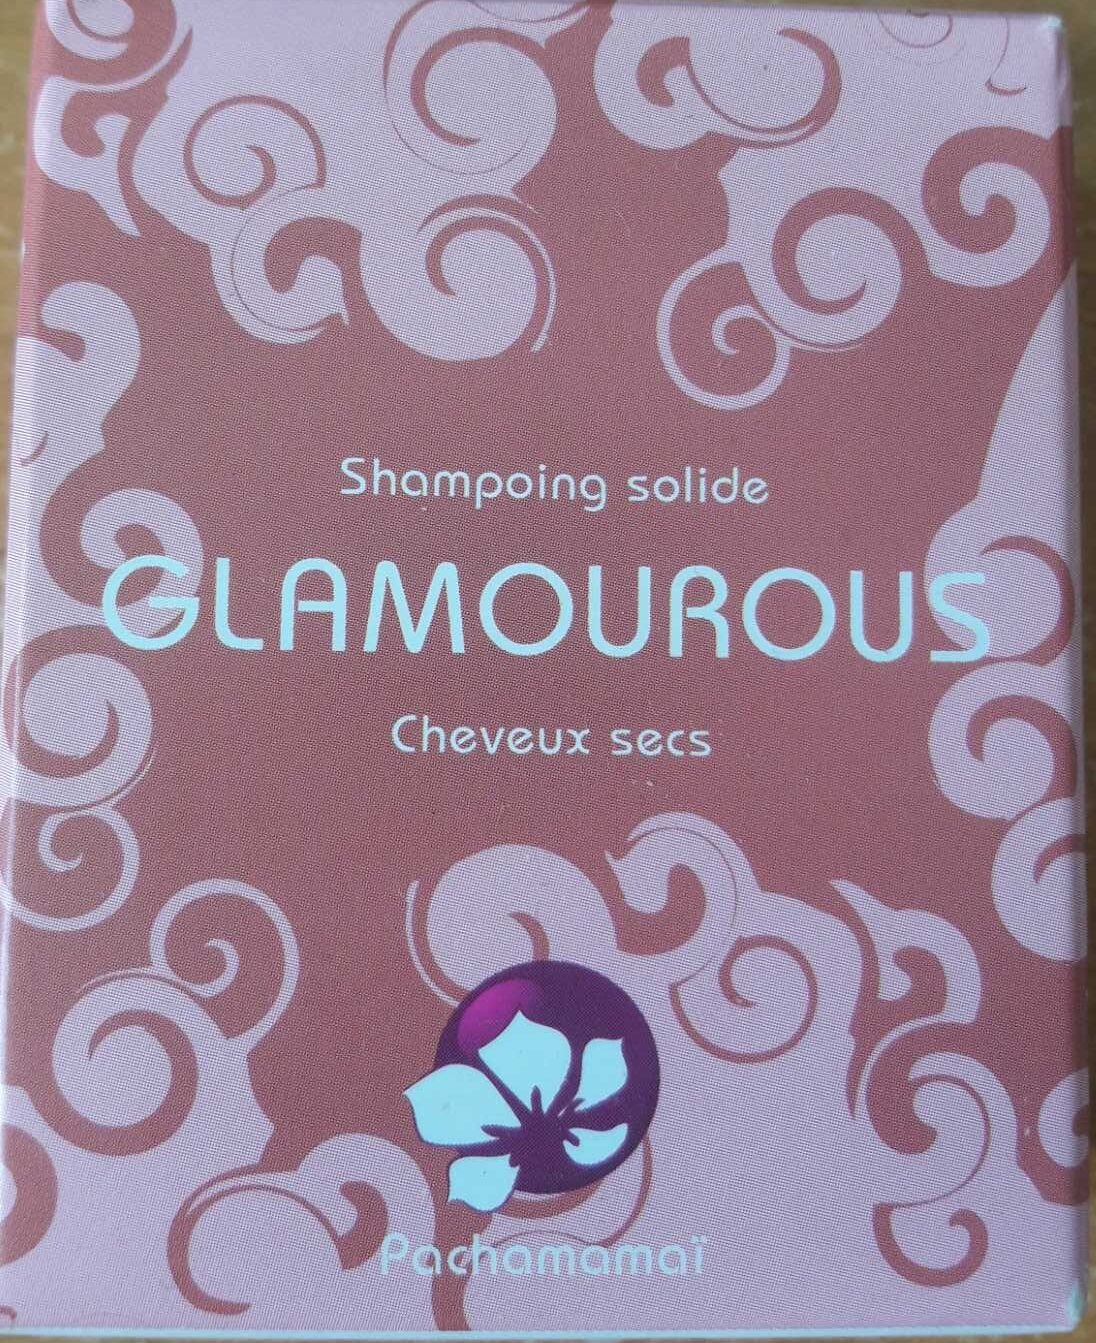 Shampoing solide - Glamourous - Cheveux secs - Product - fr